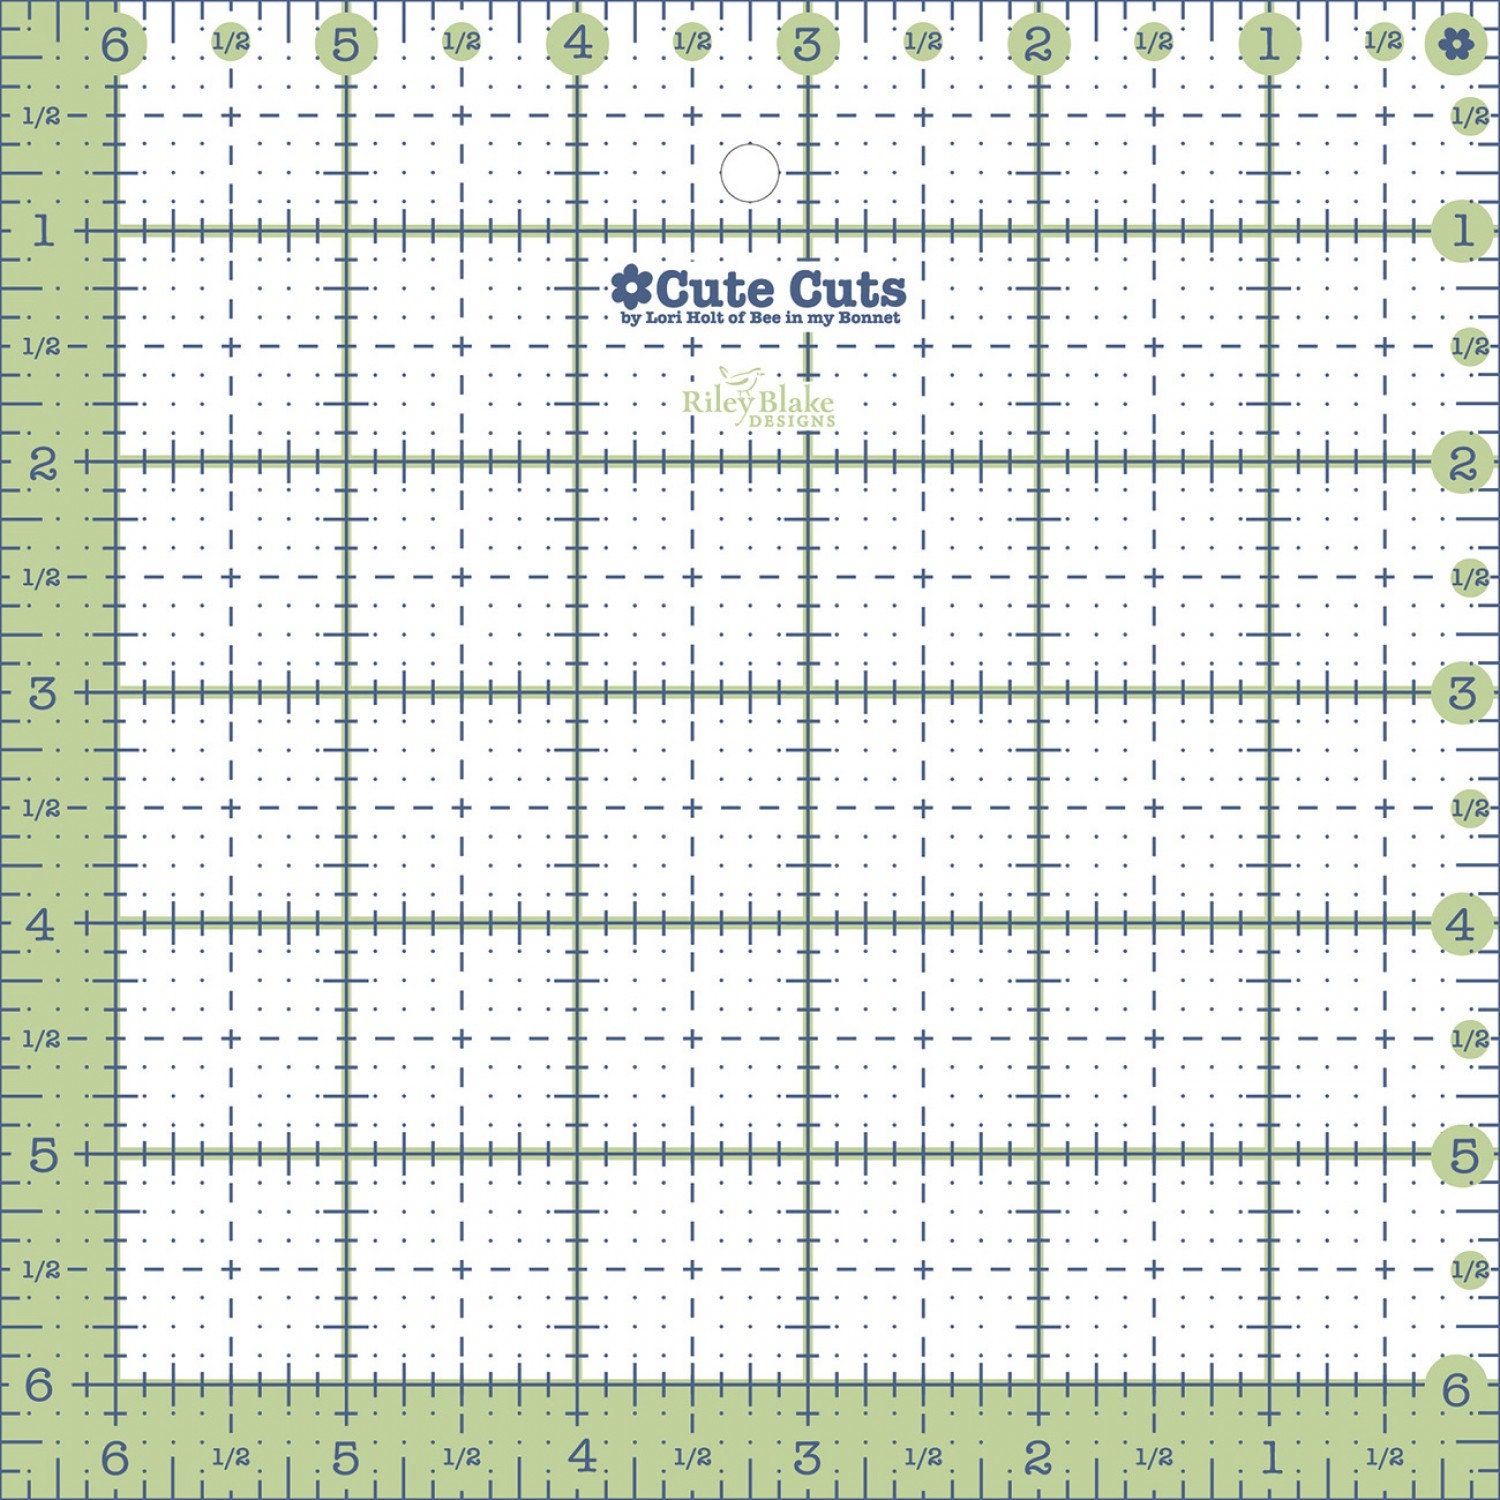 Lori Holt Circle Ruler Set - 8, 10, 12 for Quilting by Riley Blake  Designs - She Shack Shop